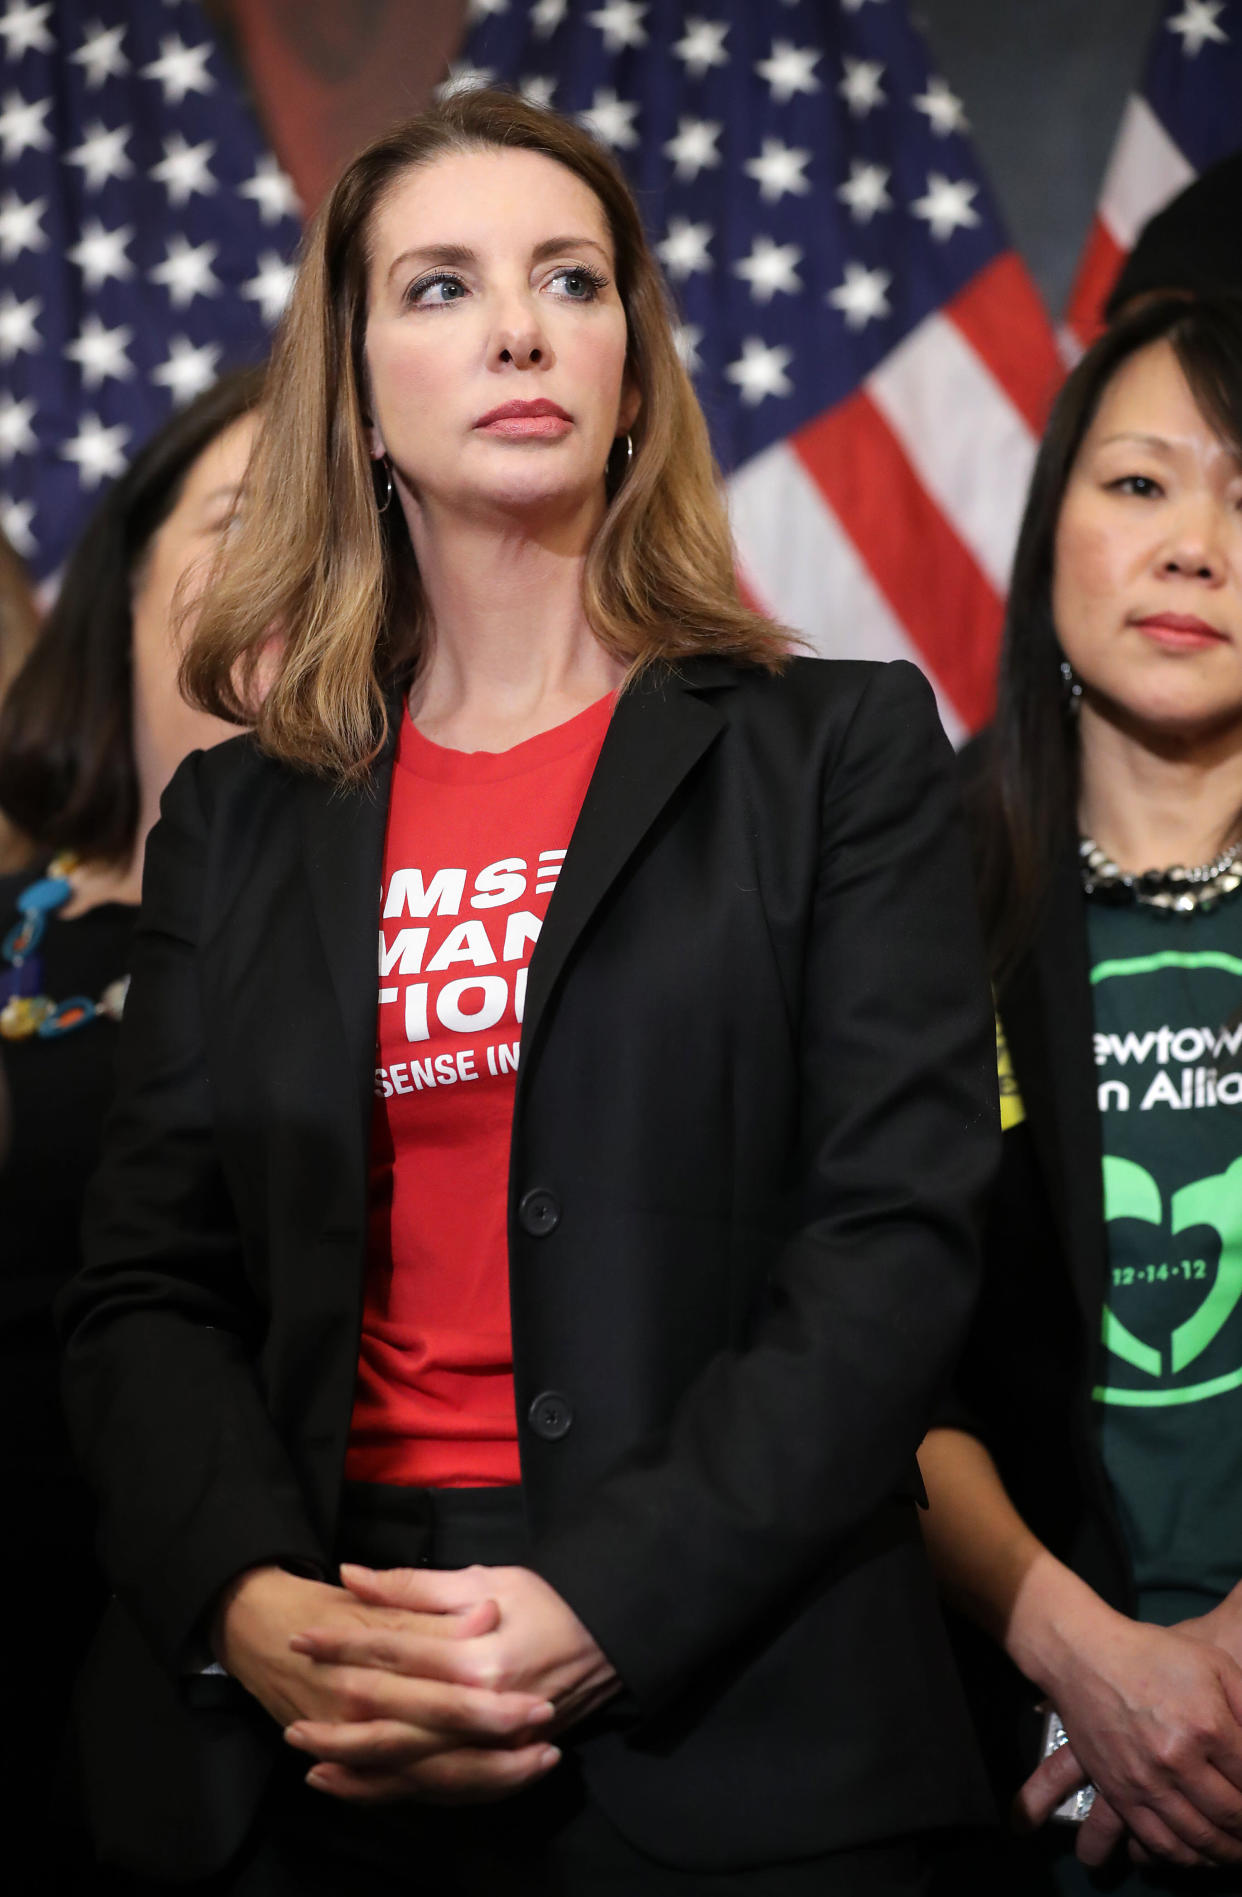 WASHINGTON, DC - JANUARY 08: Founder of Moms Demand Action for Gun Sense founder Shannon Watts  joins other gun safety advocates for a news conference to introduce legislation to expand background checks for firearm sales in the Rayburn Room of the U.S. Capitol January 08, 2019 in Washington, DC. Eight years to the day that Giffords was shot at a constituent meeting in Tuscon, Arizona, Speaker Nancy Pelosi (D-CA) unveiled a universal background check bill that House Democrats hope to pass within the first 100 days of the new Congress.   (Photo by Chip Somodevilla/Getty Images)